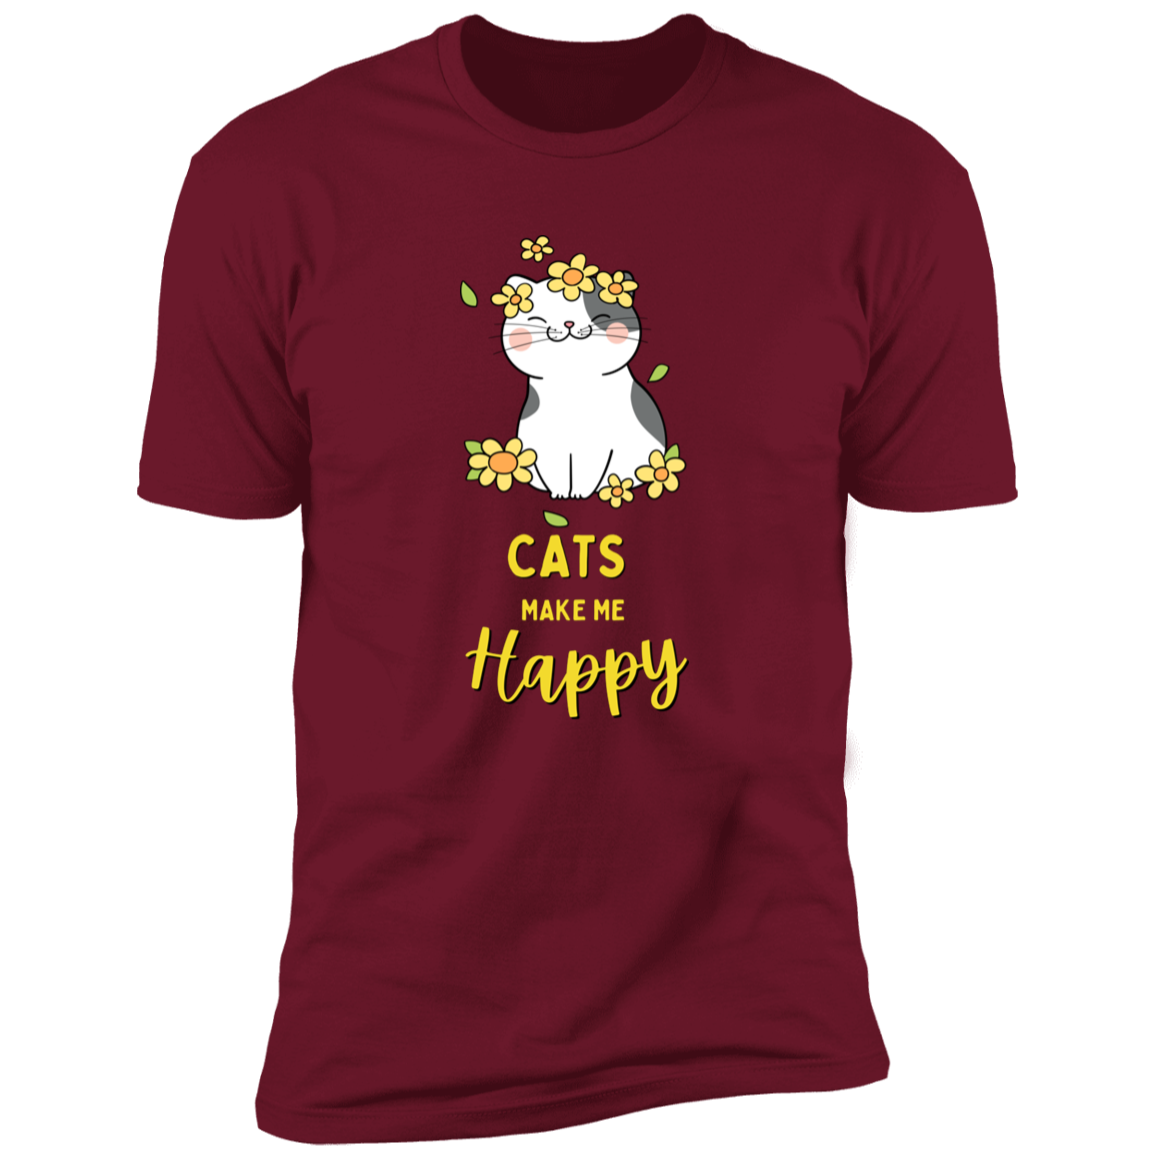 Cats Make Me Happy T-shirt, Cat Shirt for humans, in cardinal red